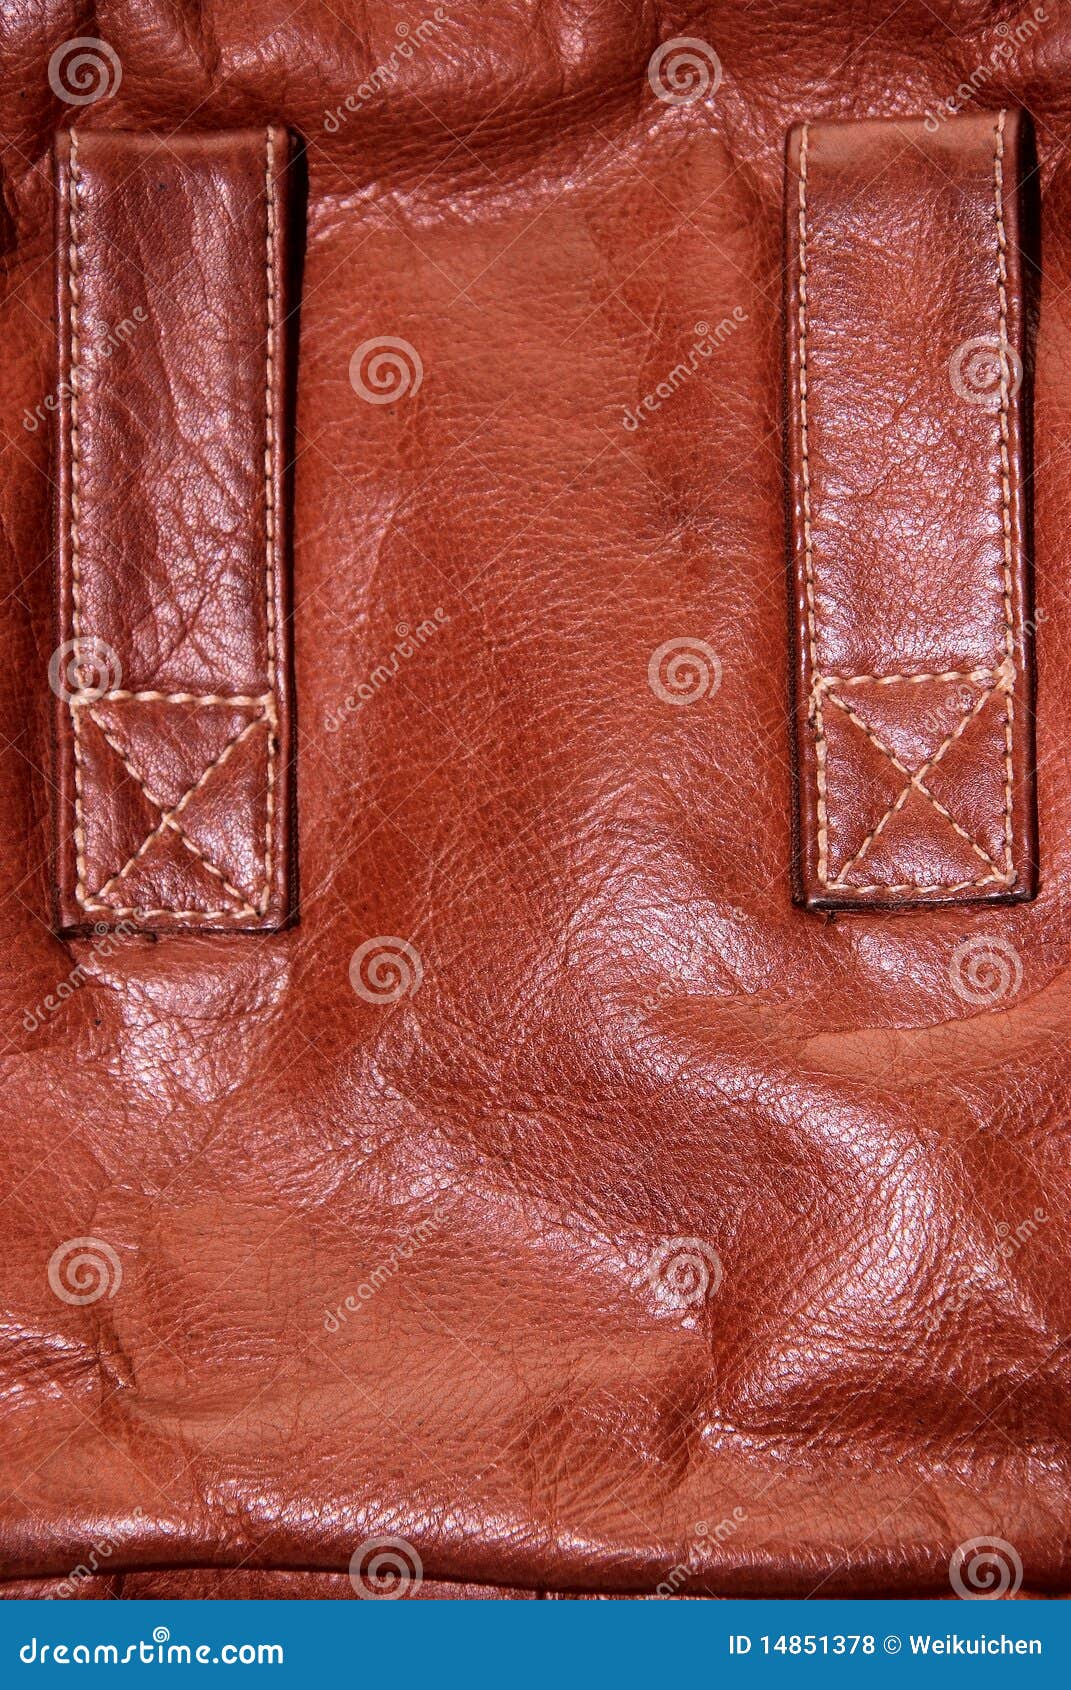 Leather texture stock photo. Image of material, background - 14851378